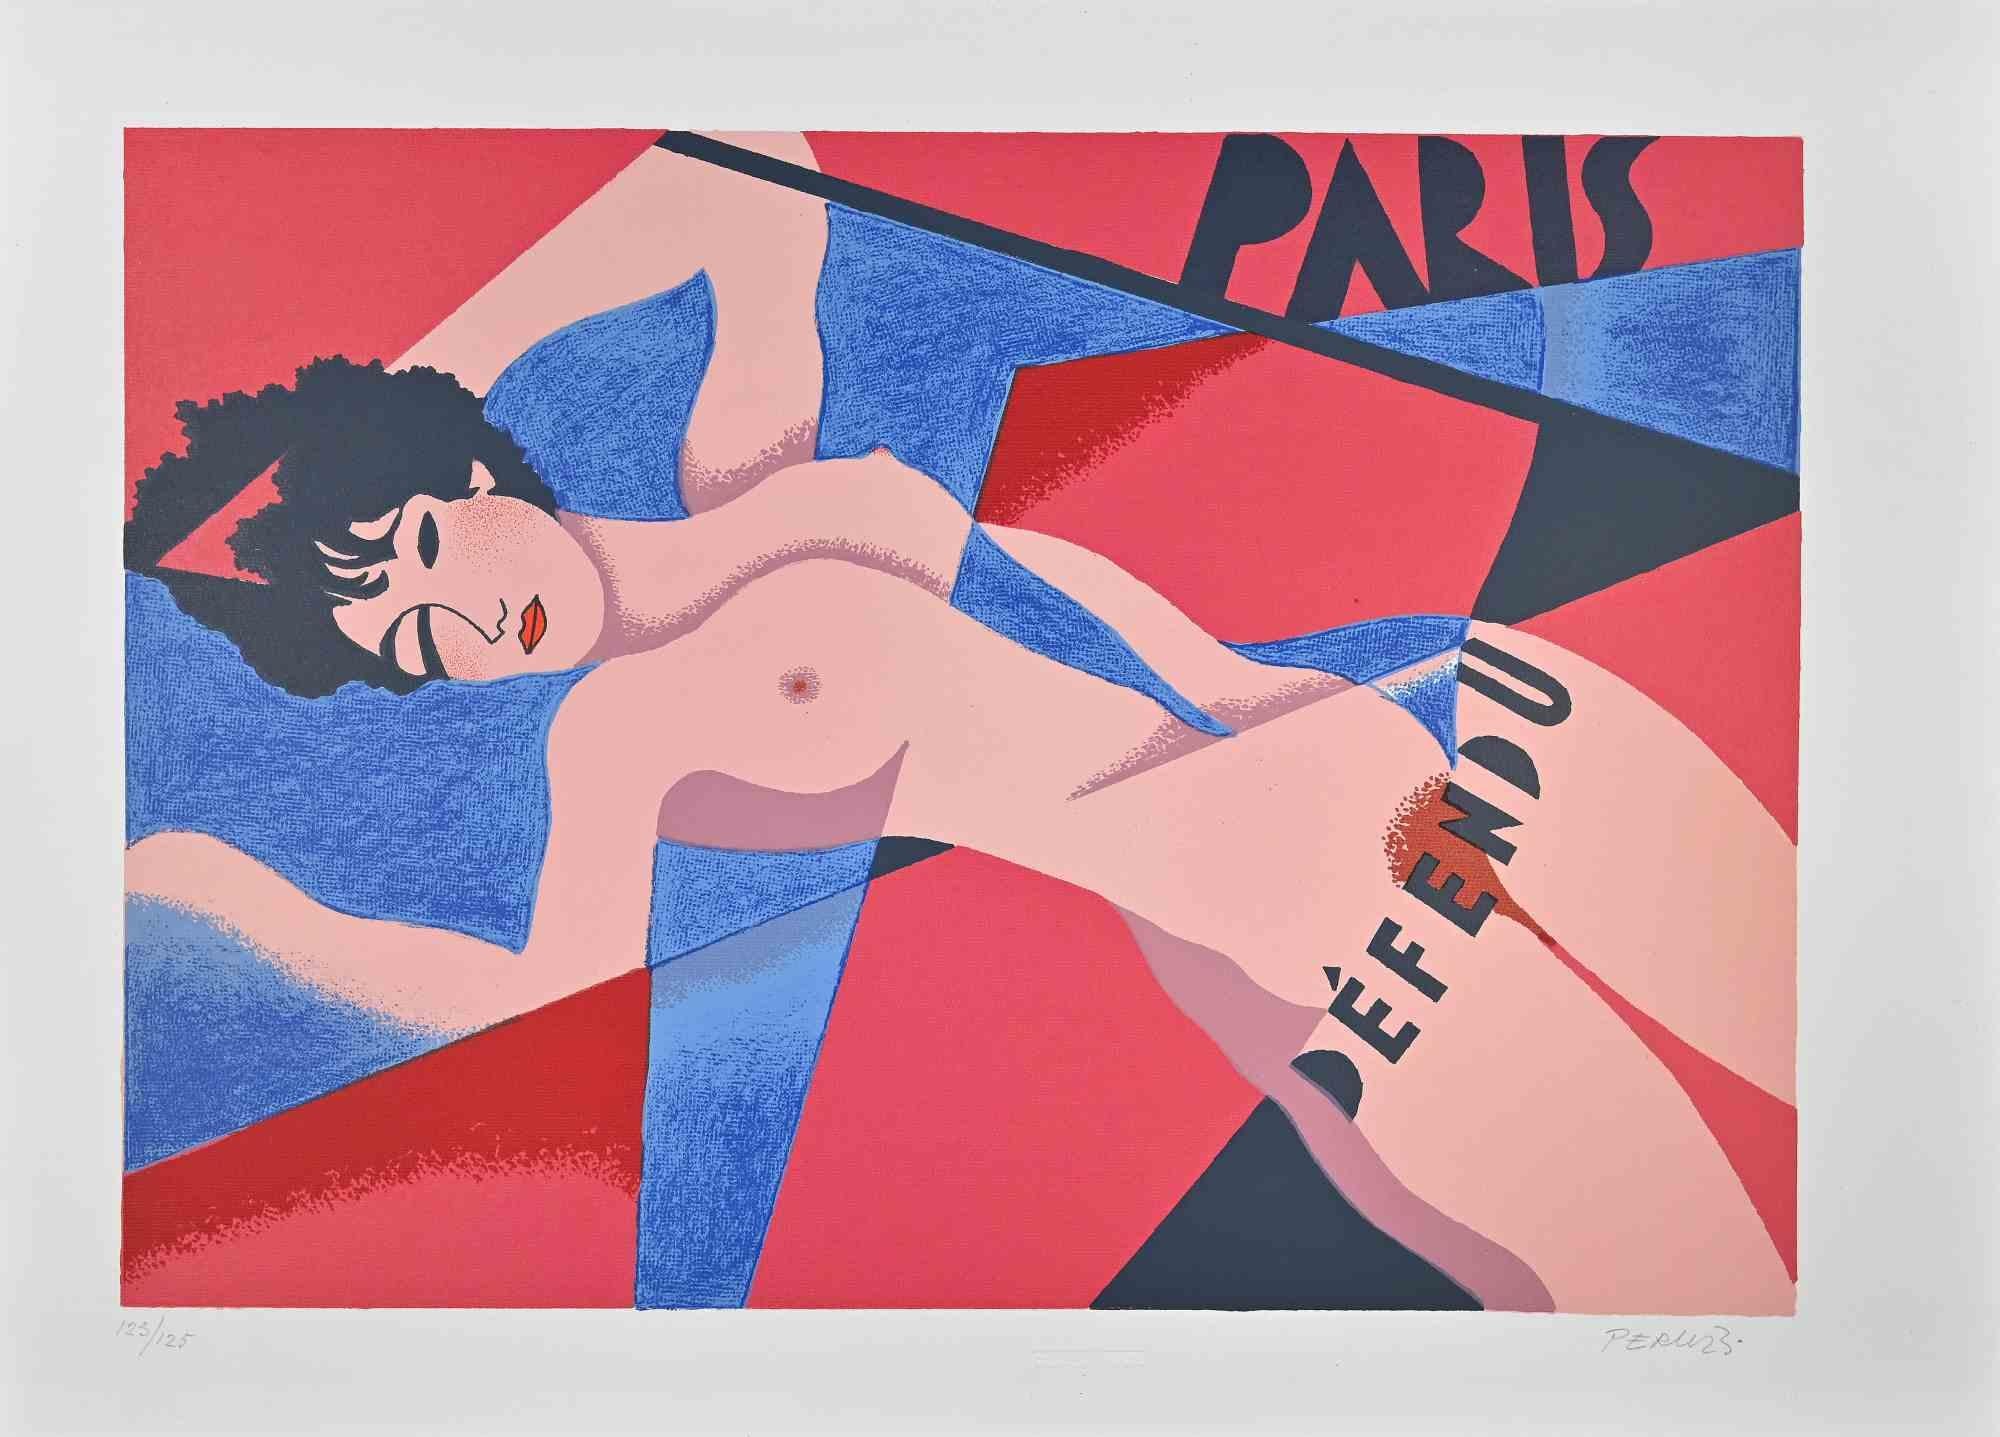 Nude of Woman  is an original artwork realized by  Osvaldo Peruzzi in 1988 .

Mixed colored lithograph .

Hand-signed by the artist on the lower right. Numbered on the lower left margin 123/125.

On the artwork there are printed inscriptions: Paris